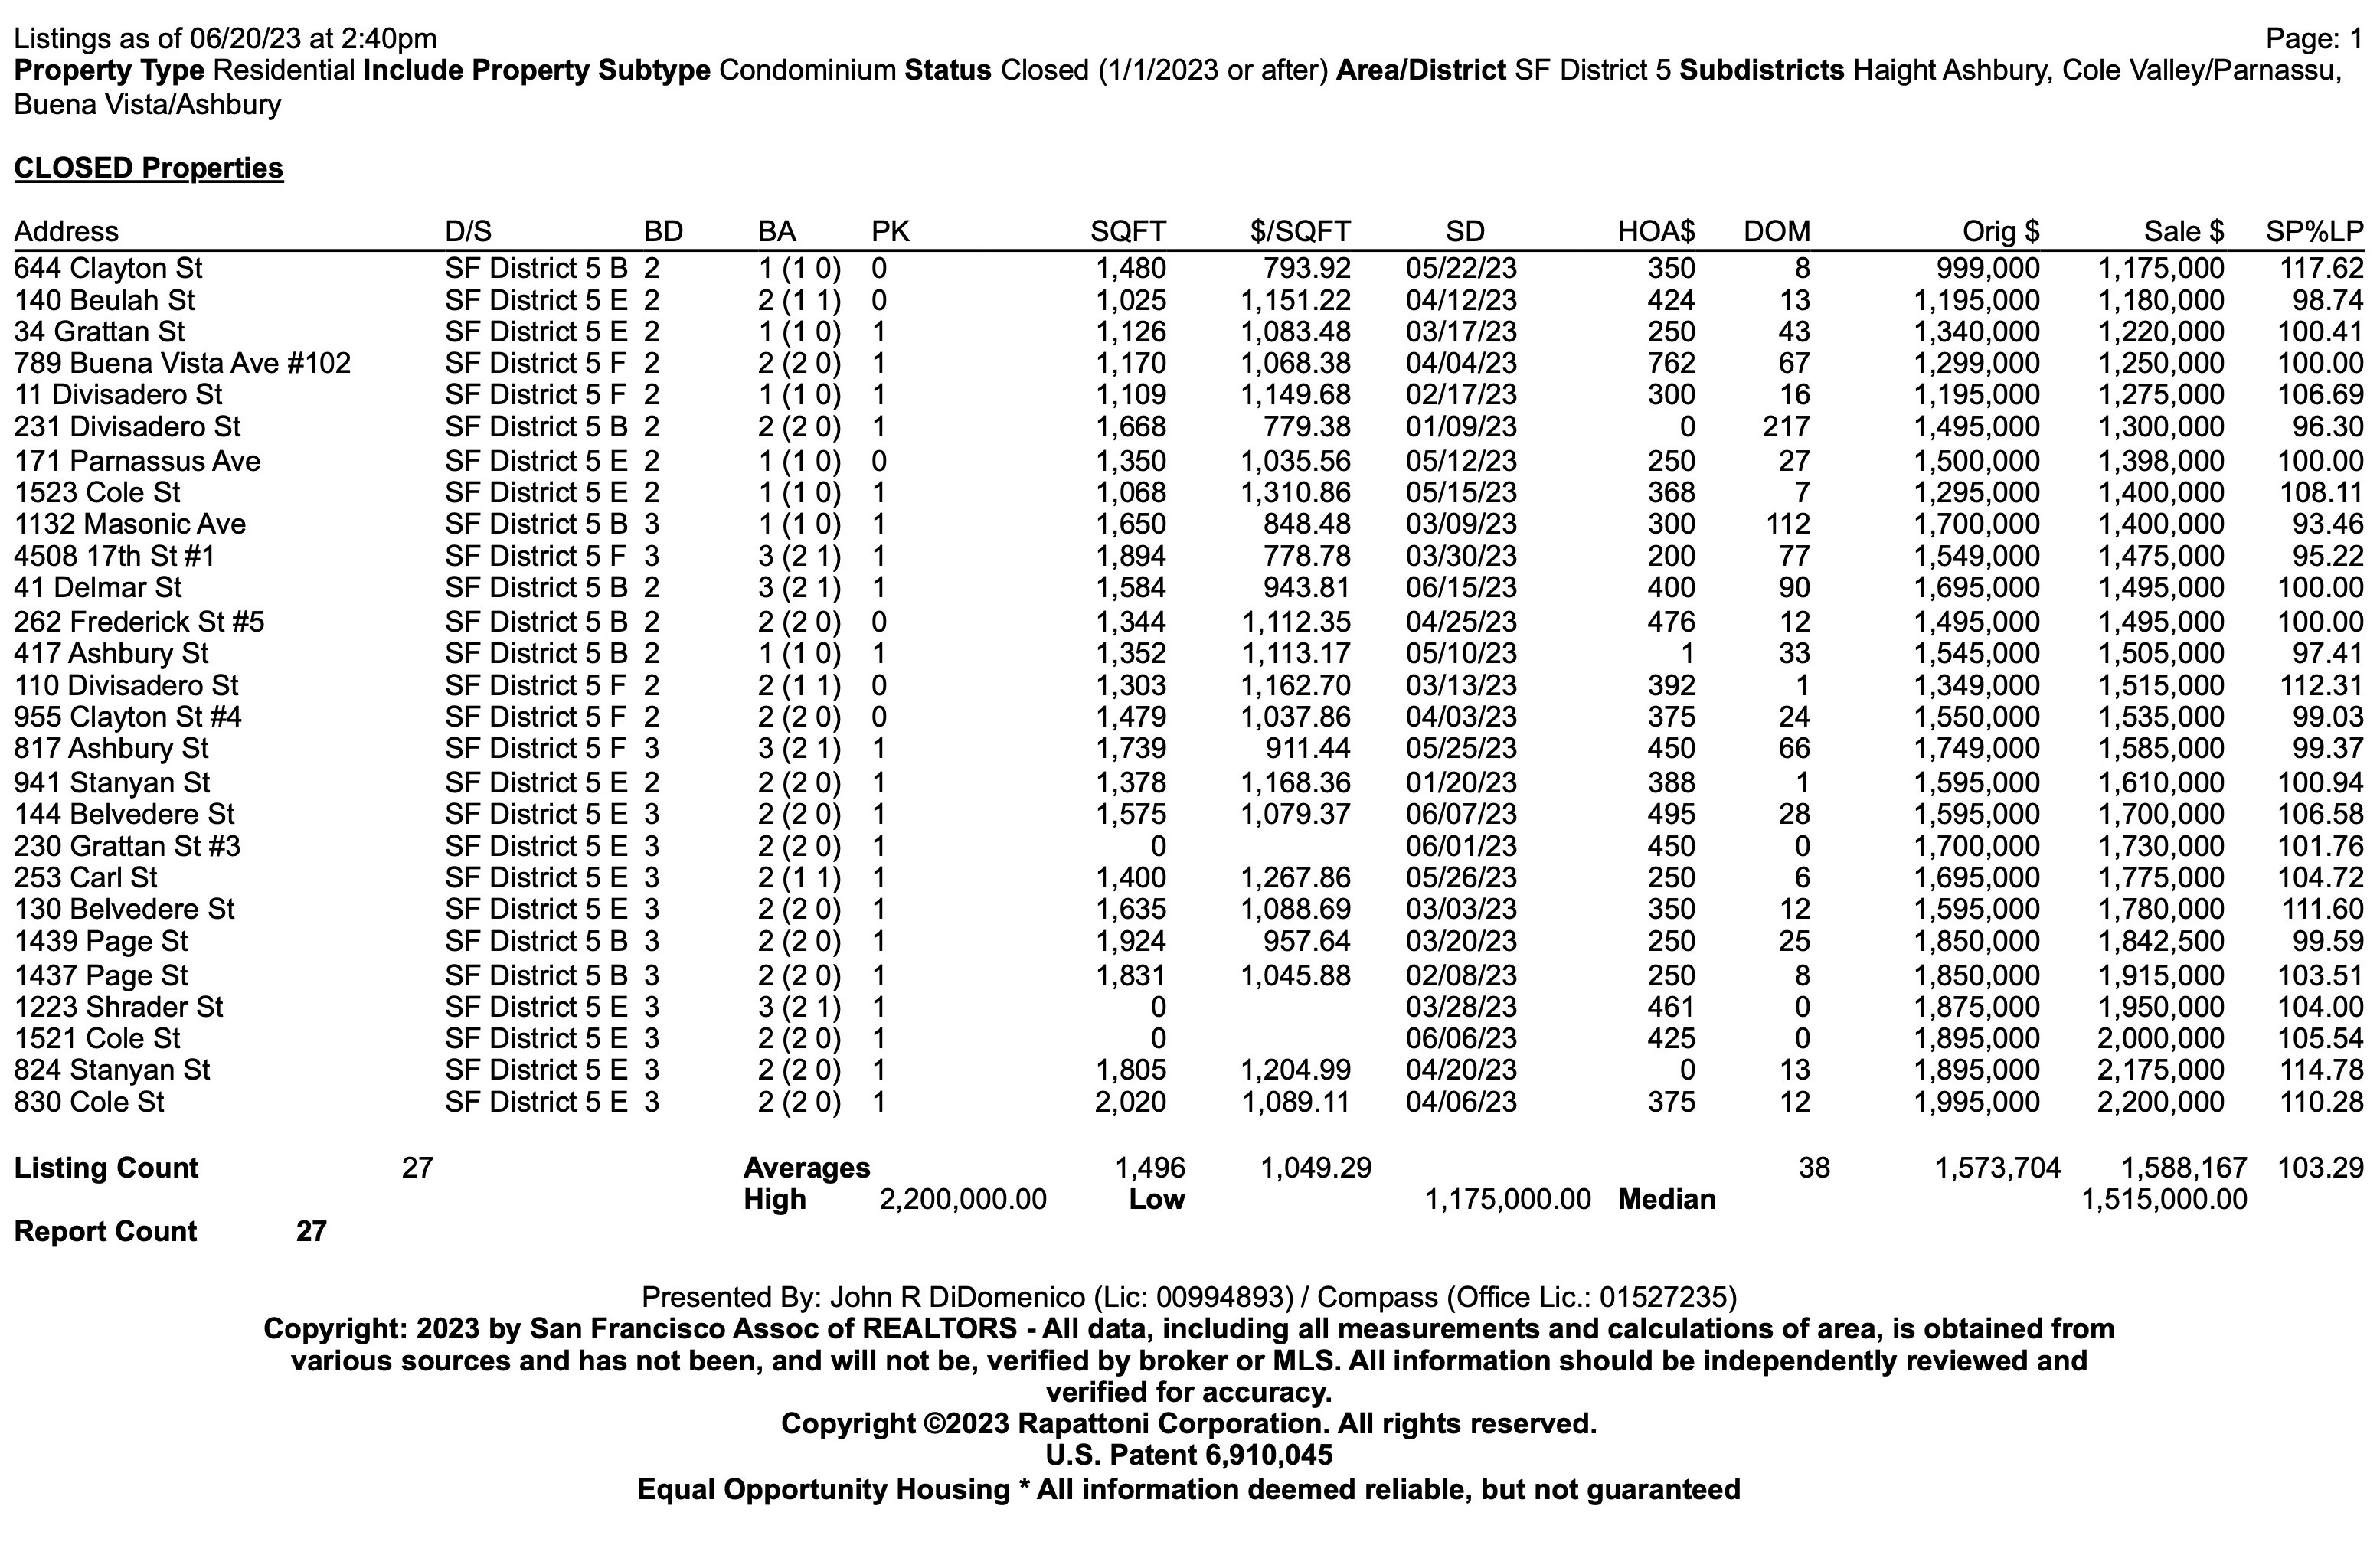 Screen shot of the condo sales report for Cole Valley, Ashbury Heights, and Height Ashbury in San Francisco, CA